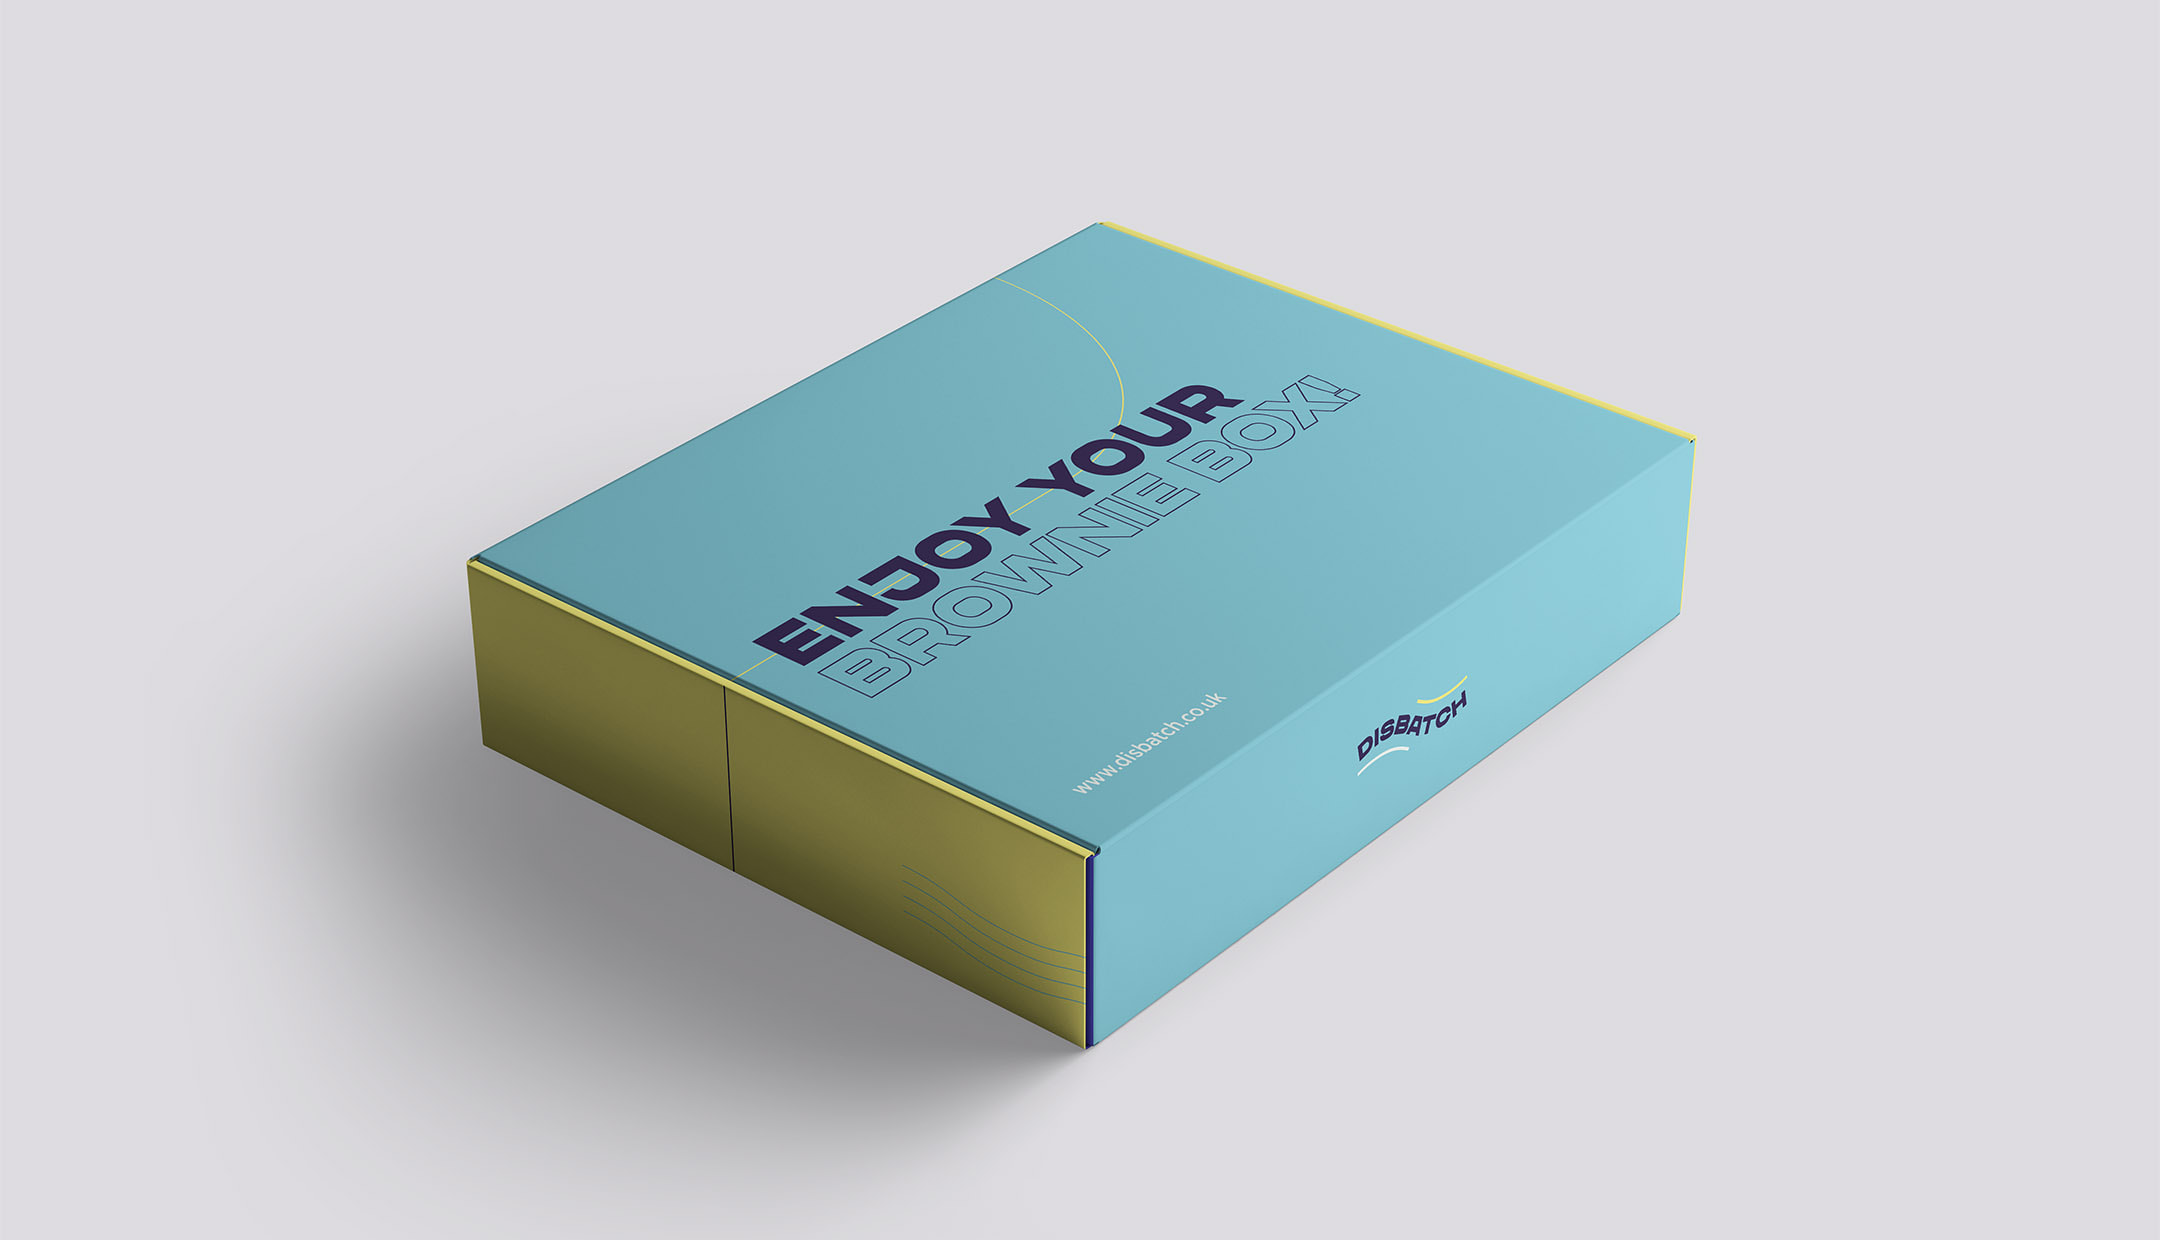 Disbatch packaging design for brownie boxes with the lid closed